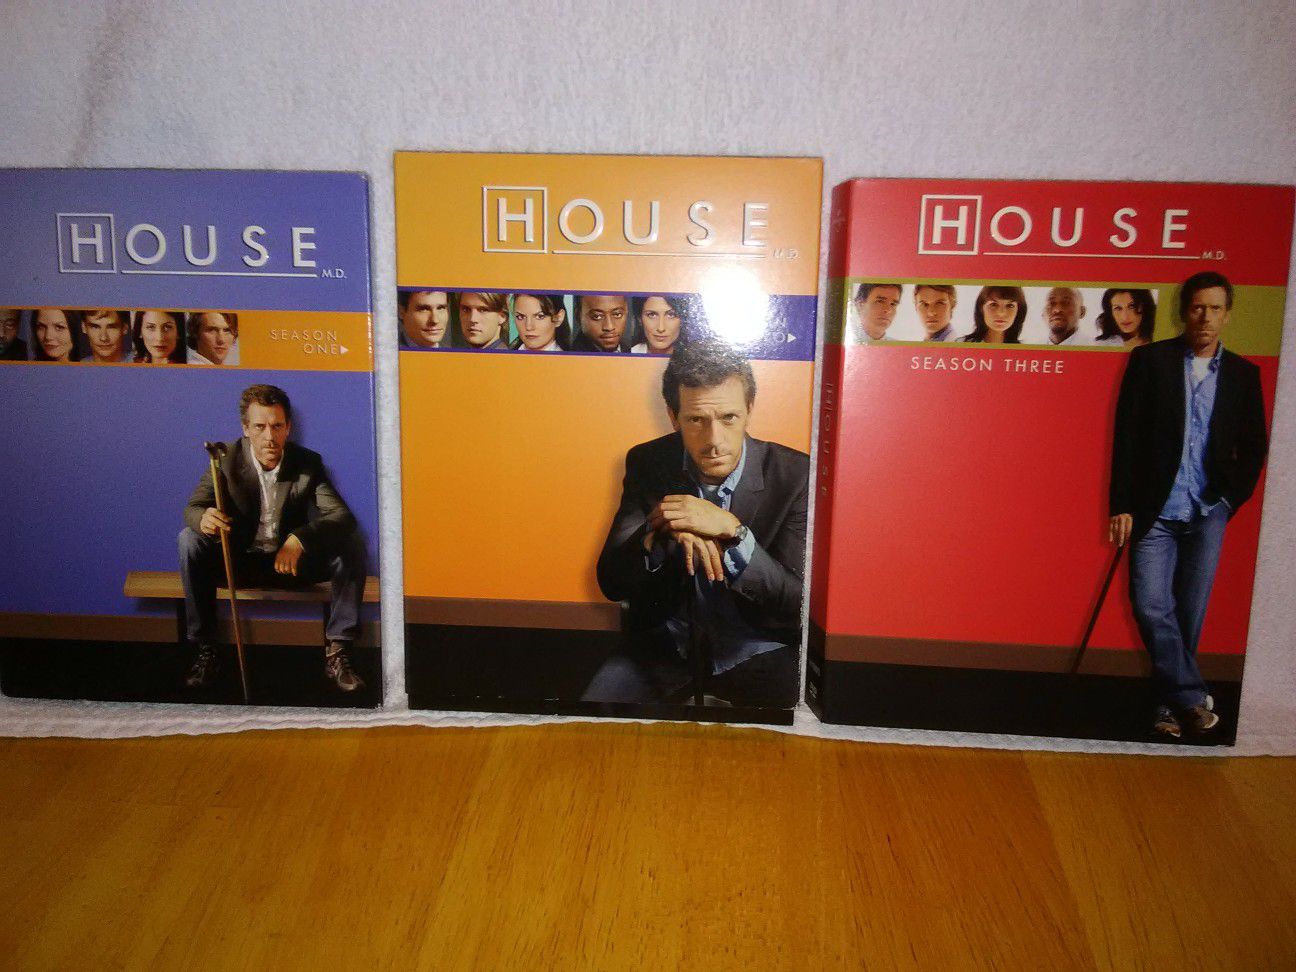 HOUSE md on DVD's Seasons 1,2 and3